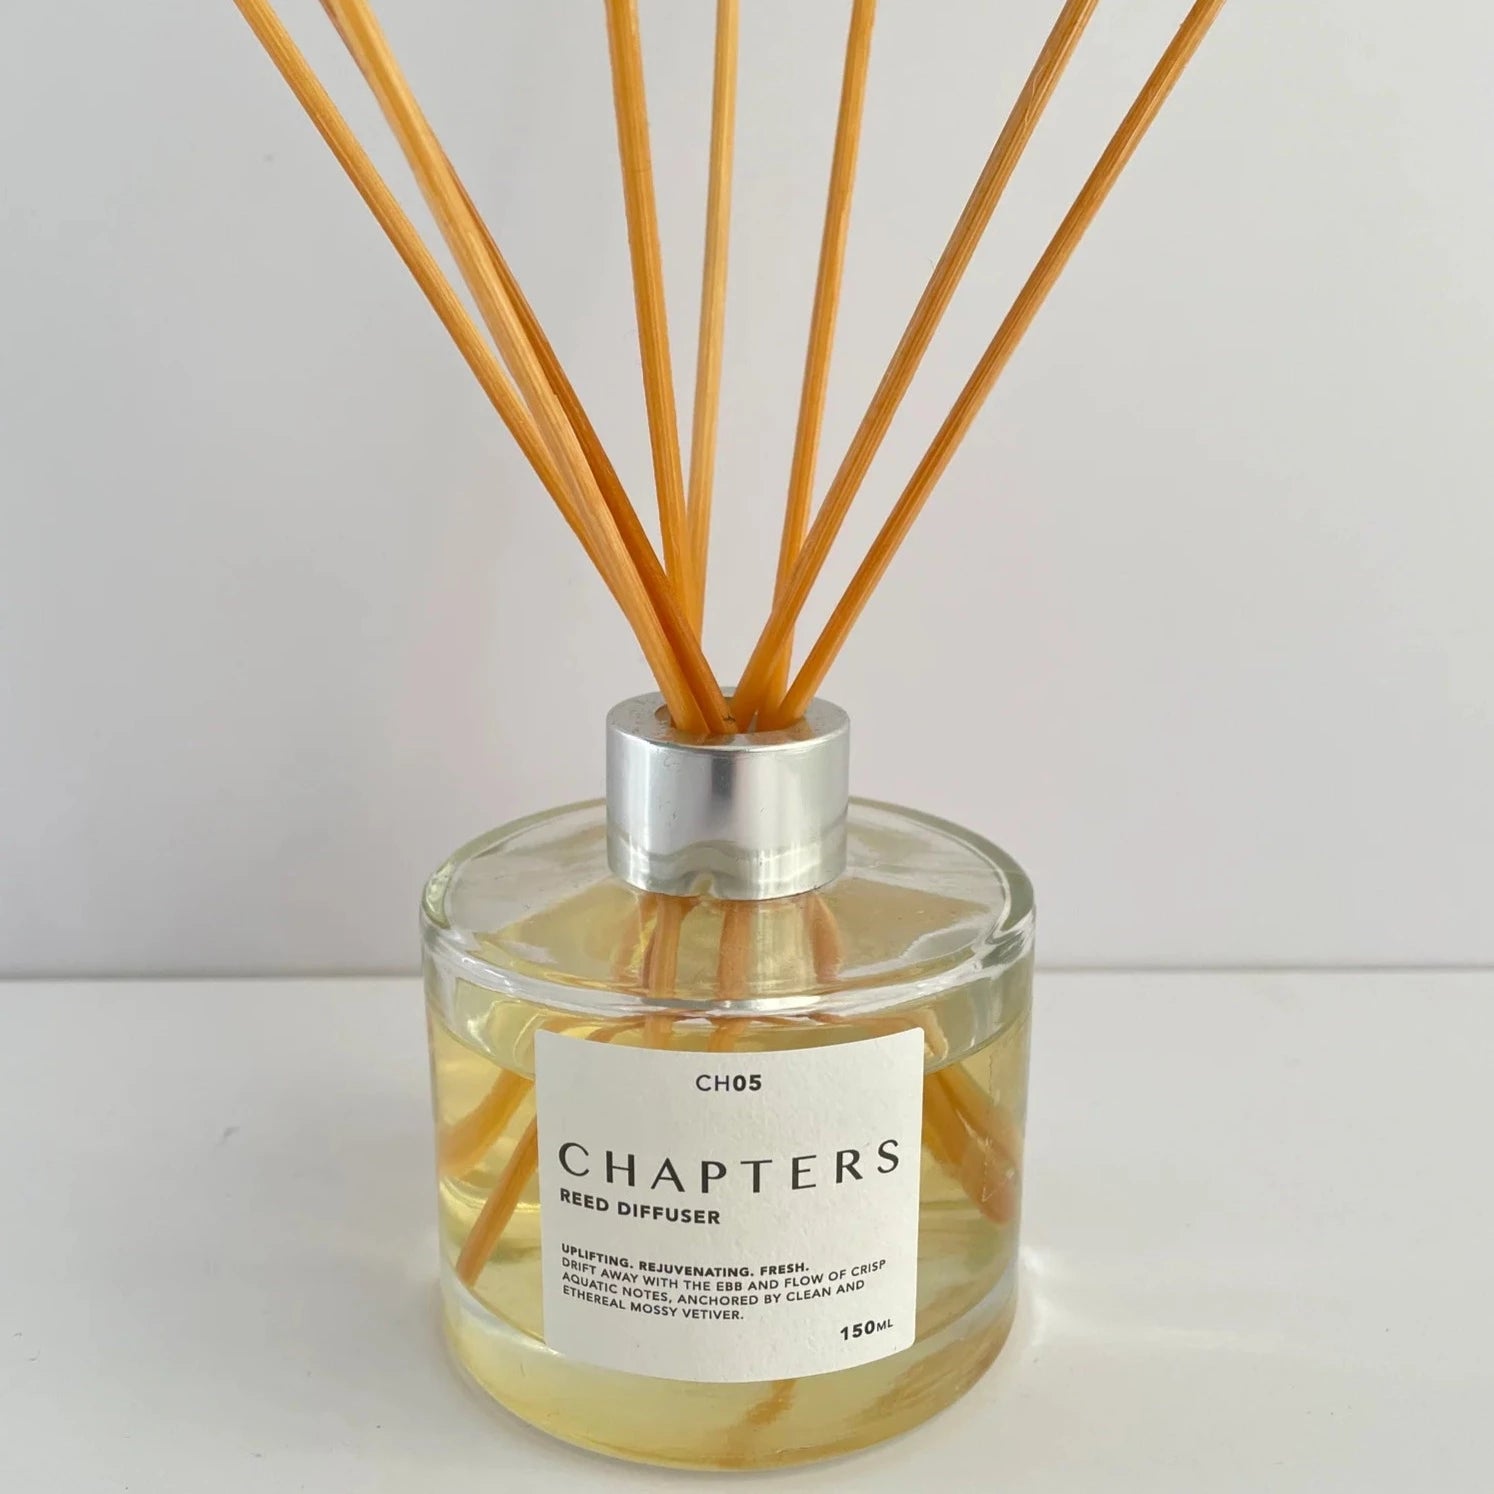 Chapters No 5 Reed Diffuser